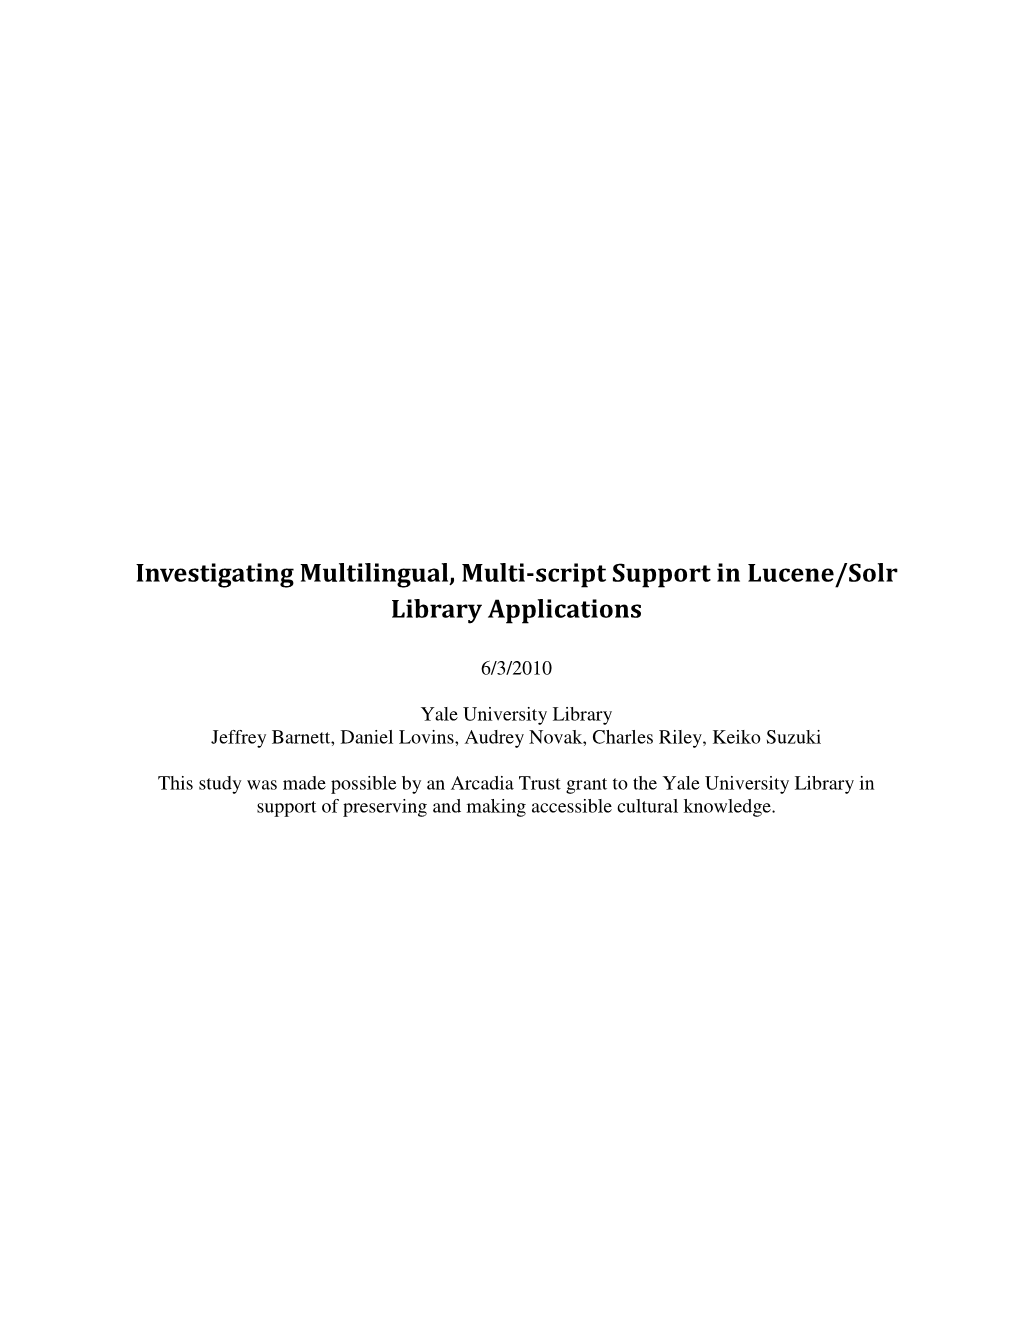 Investigating Multilingual, Multi-Script Support in Lucene/Solr Library Applications